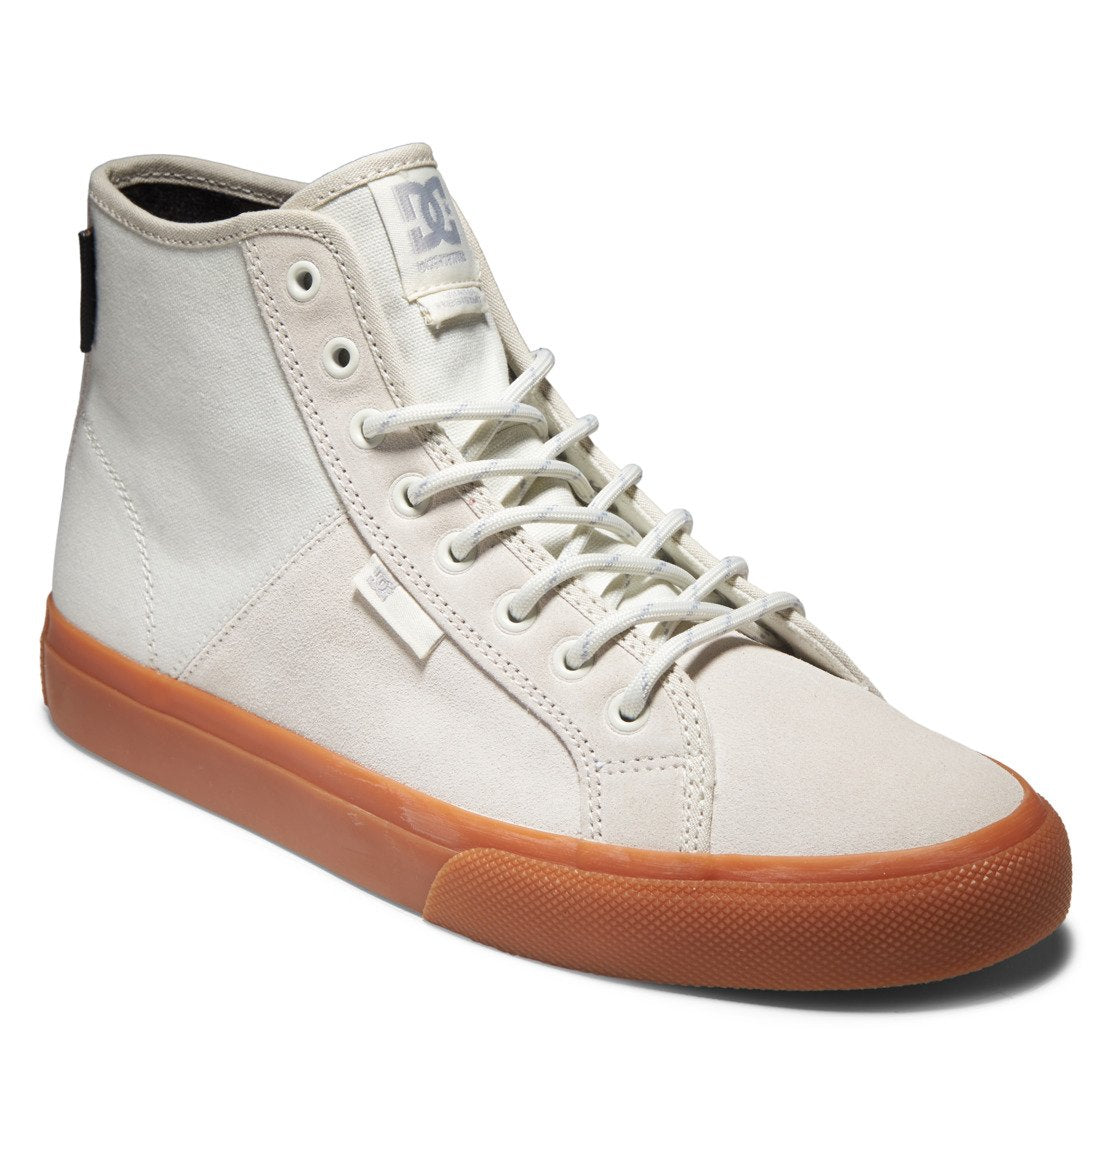 Manual Hi High Top Winterized Shoes Off White Gum